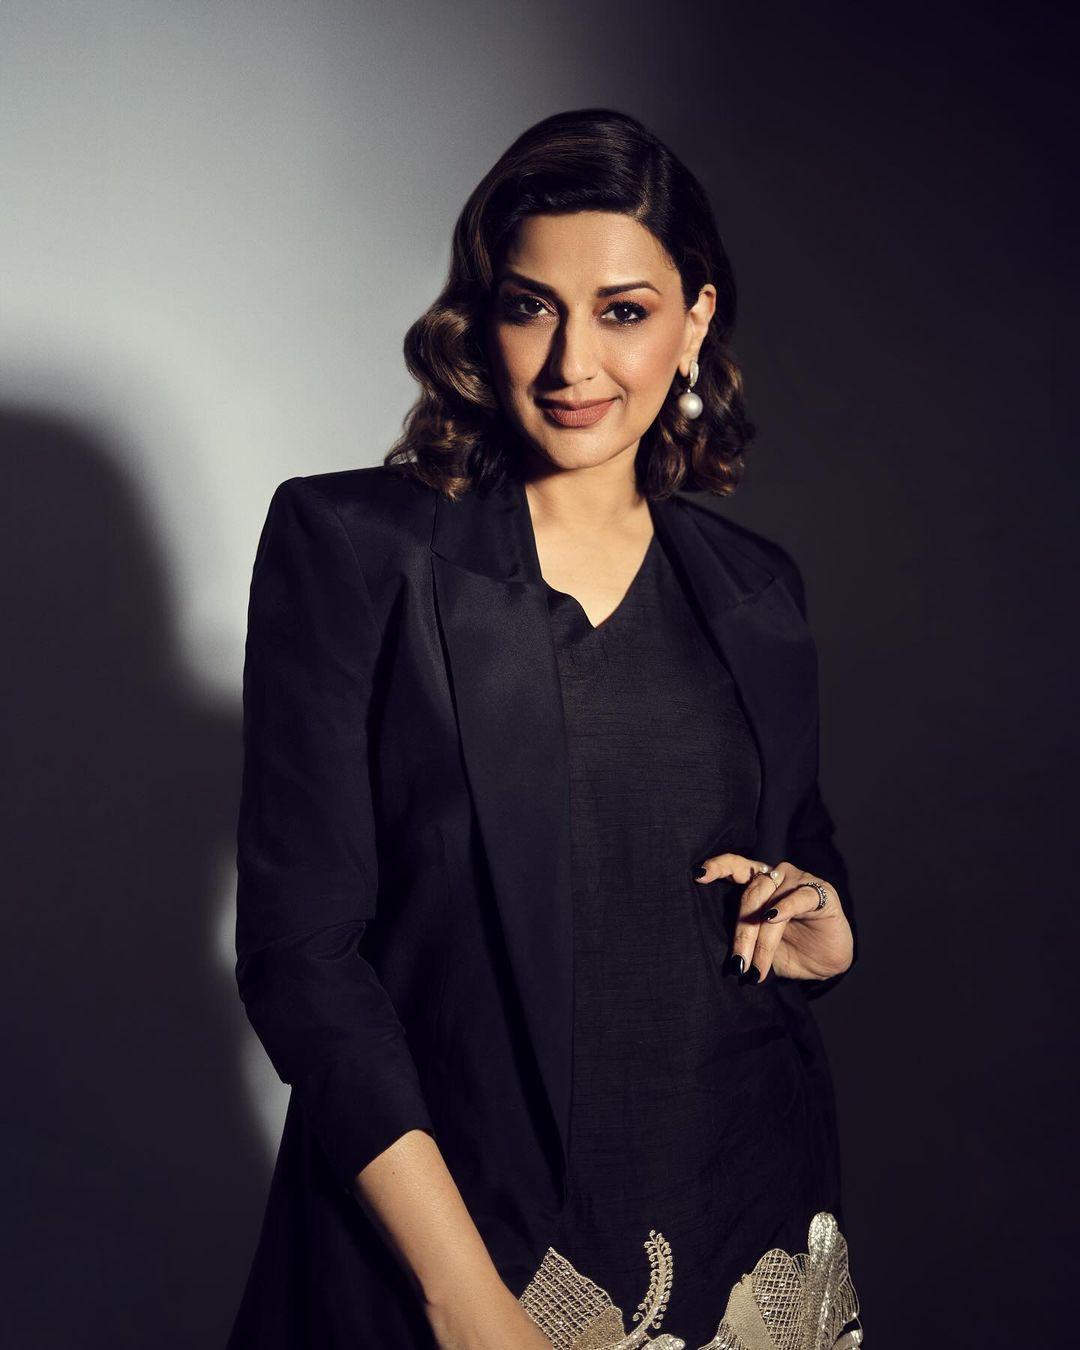  Sonali Bendre faced metastatic cancer with resilience. Diagnosed in 2018, she underwent treatment in New York and later shared her transformative journey, emphasizing the importance of positivity and support during such challenging times